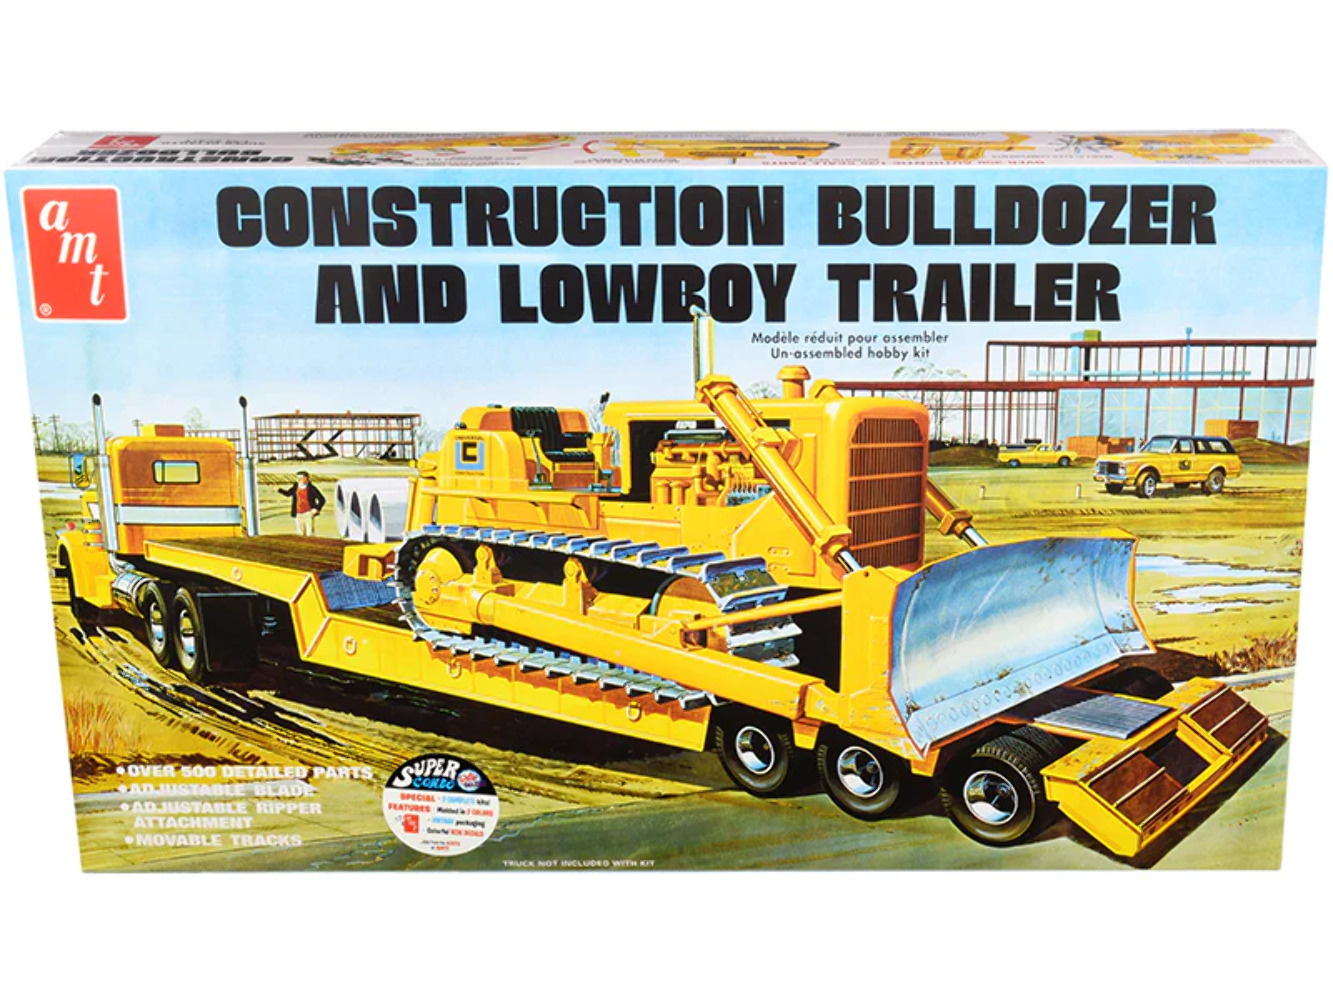 Skill 3 Model Kit Construction Bulldozer and Lowboy Trailer Set of 2 pieces 1/25